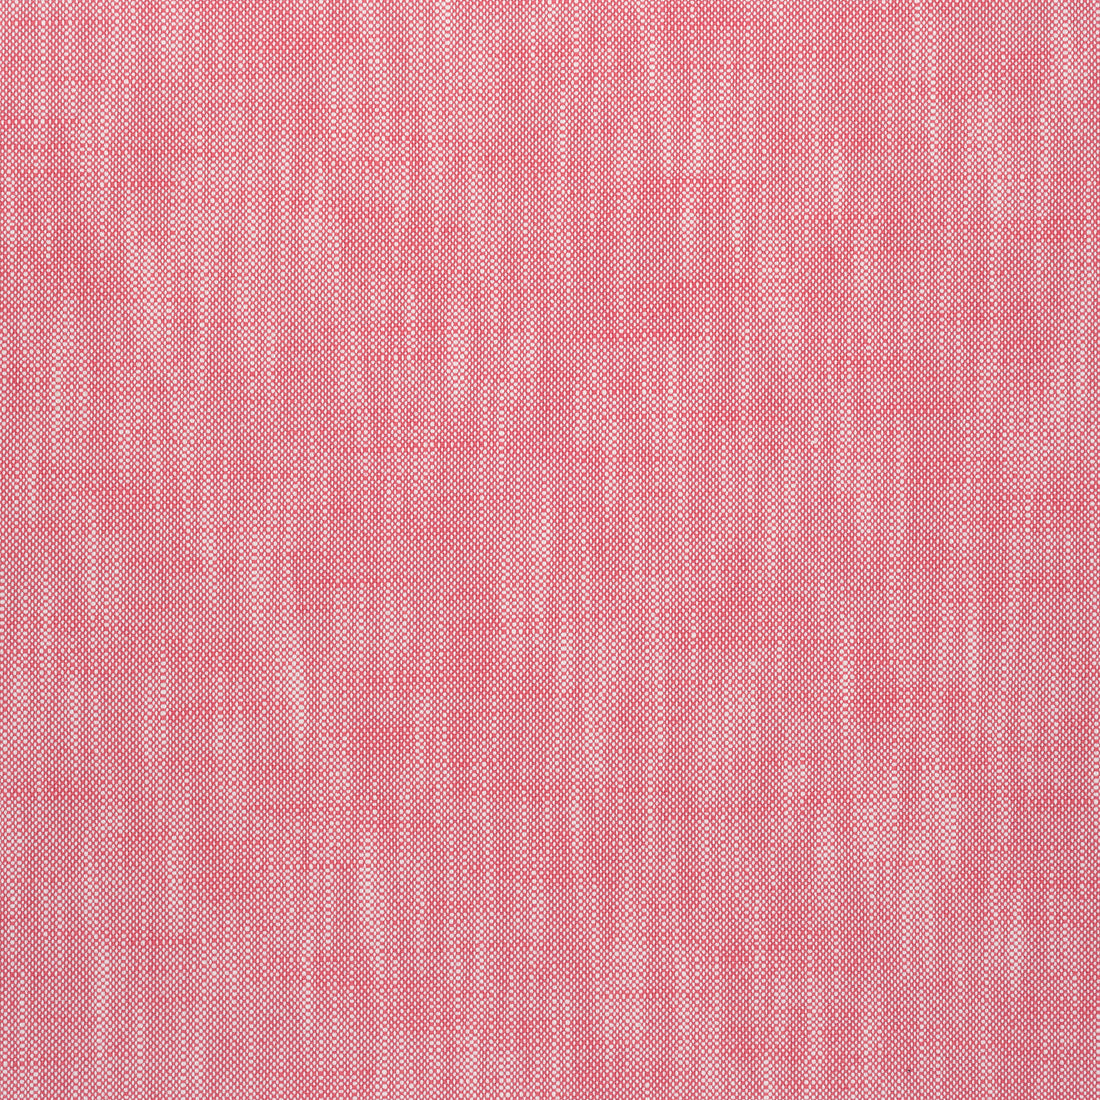 Bristol fabric in peony color - pattern number W73406 - by Thibaut in the Landmark Textures collection